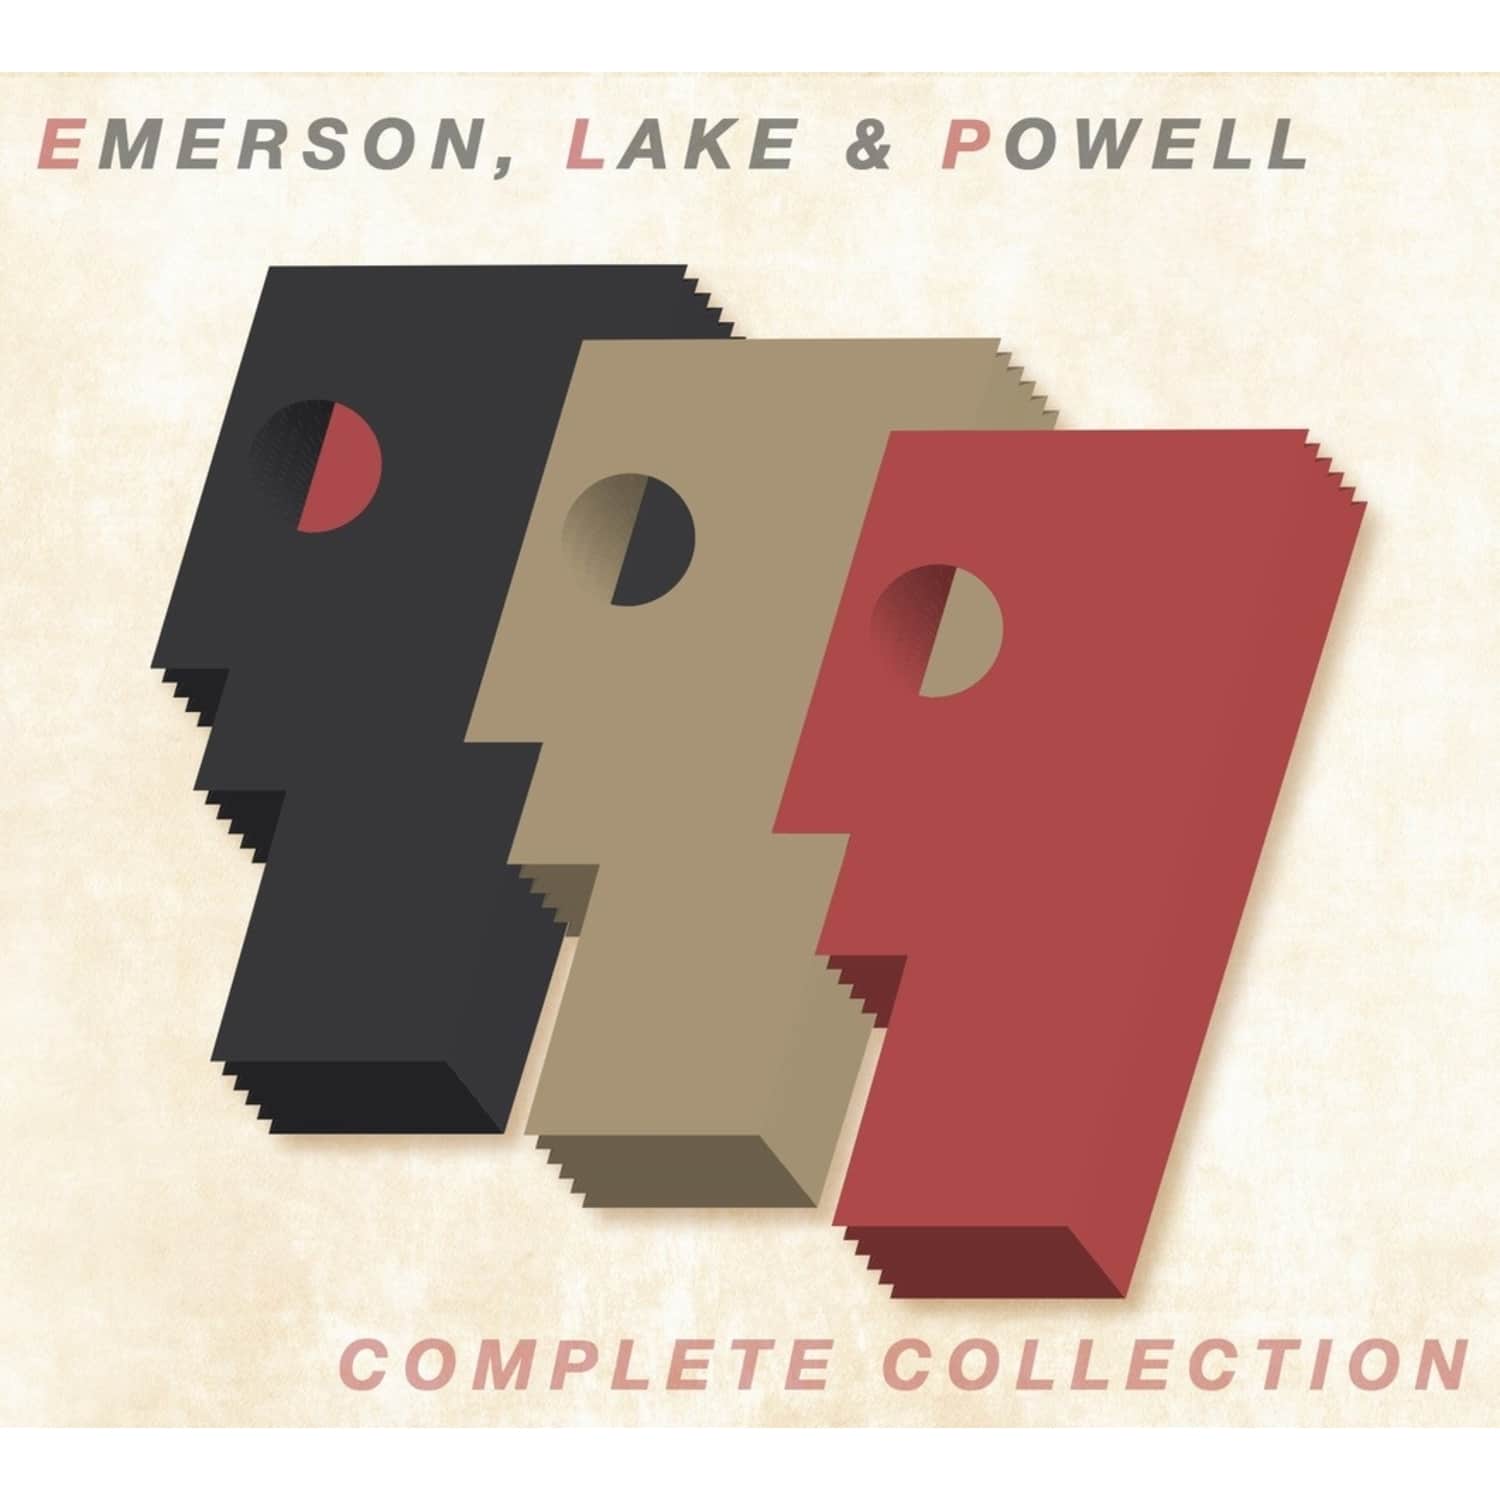 Lake Emerson & Powell - THE COMPLETE COLLECTION 